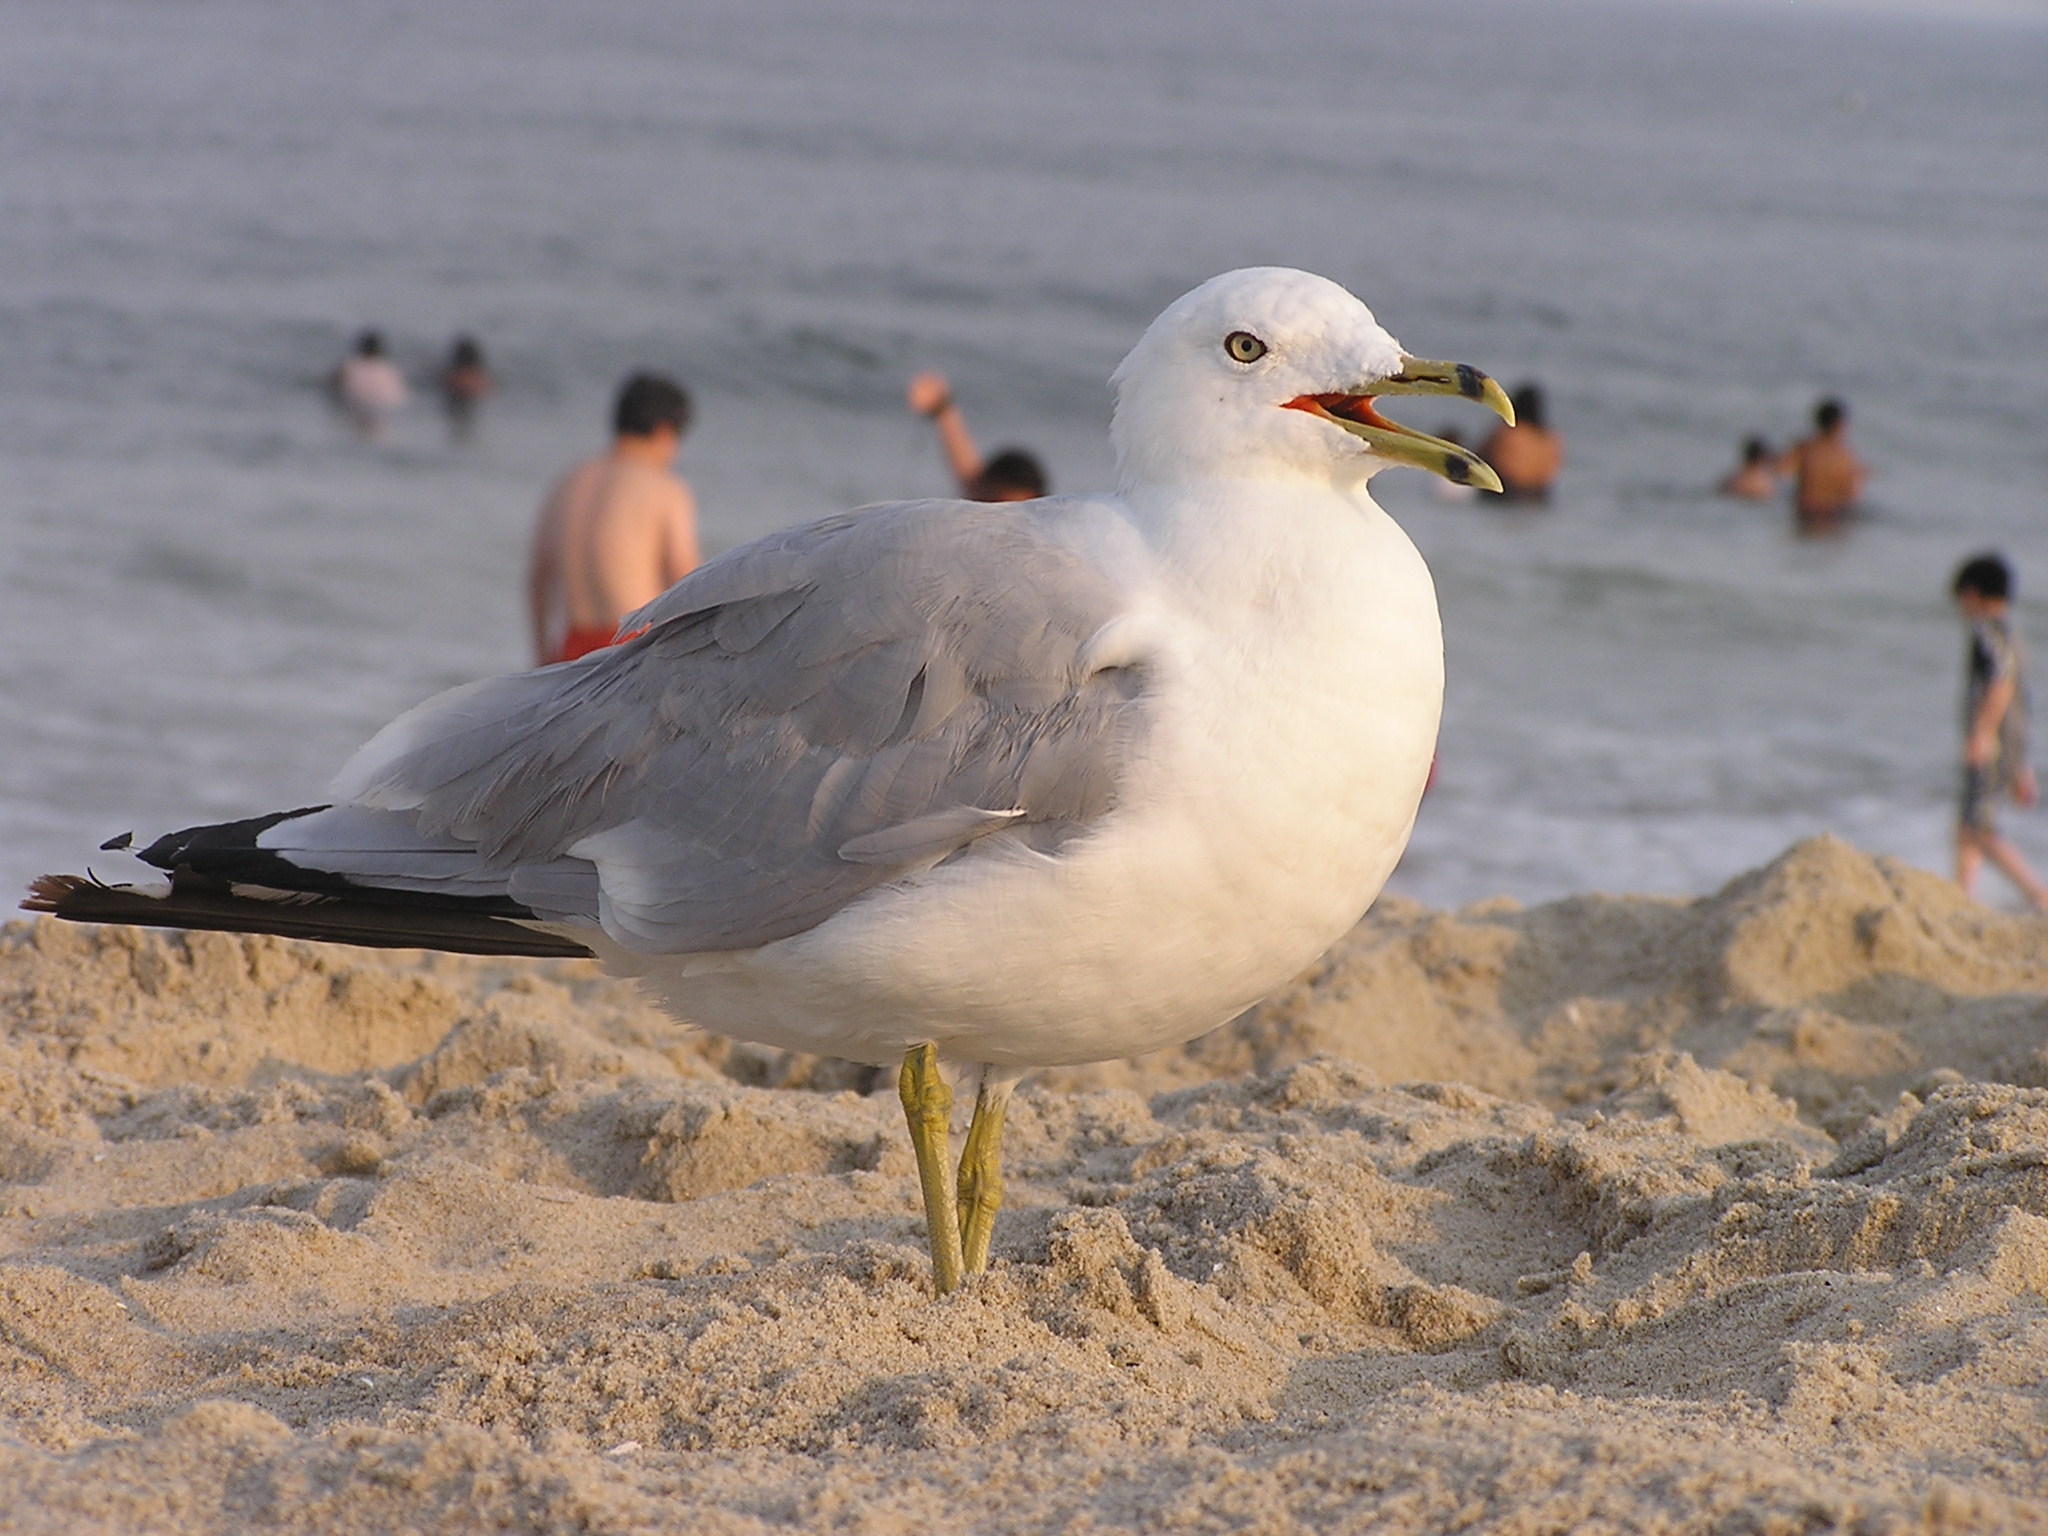 a seagull standing on top of the sand next to people in the water